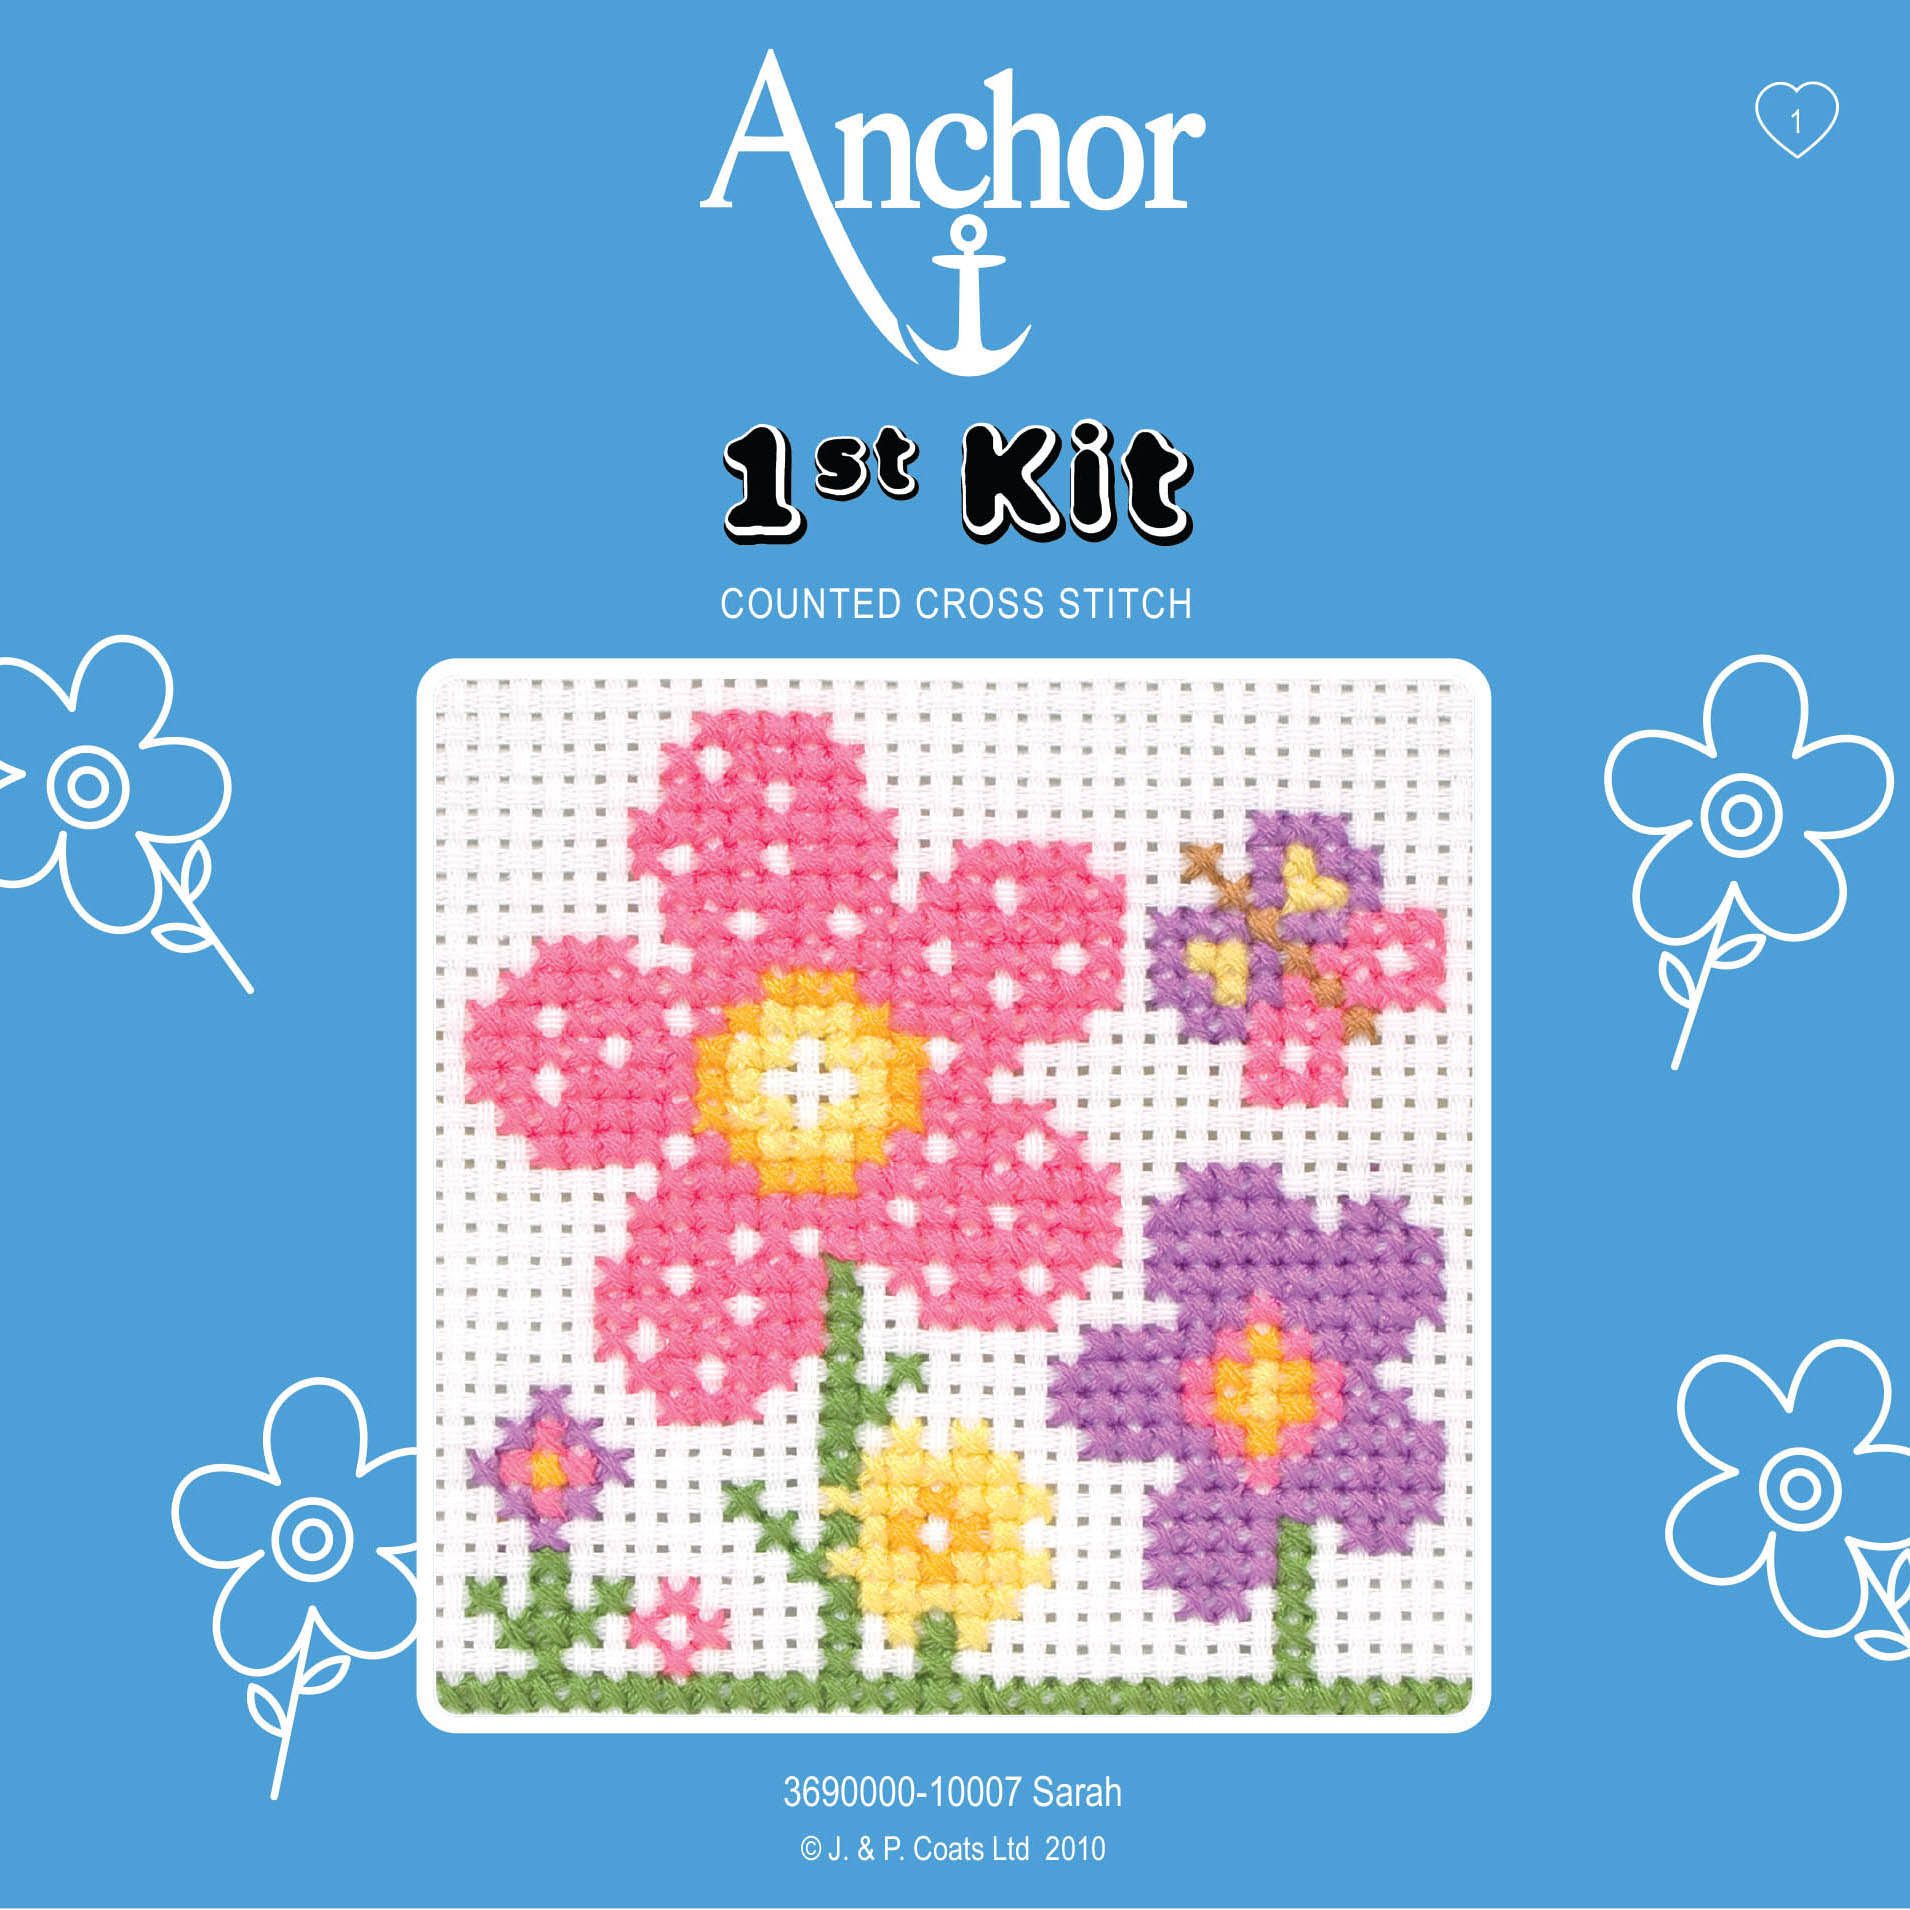 Anchor 1st Counted Cross Stitch Kit - Flowers product image